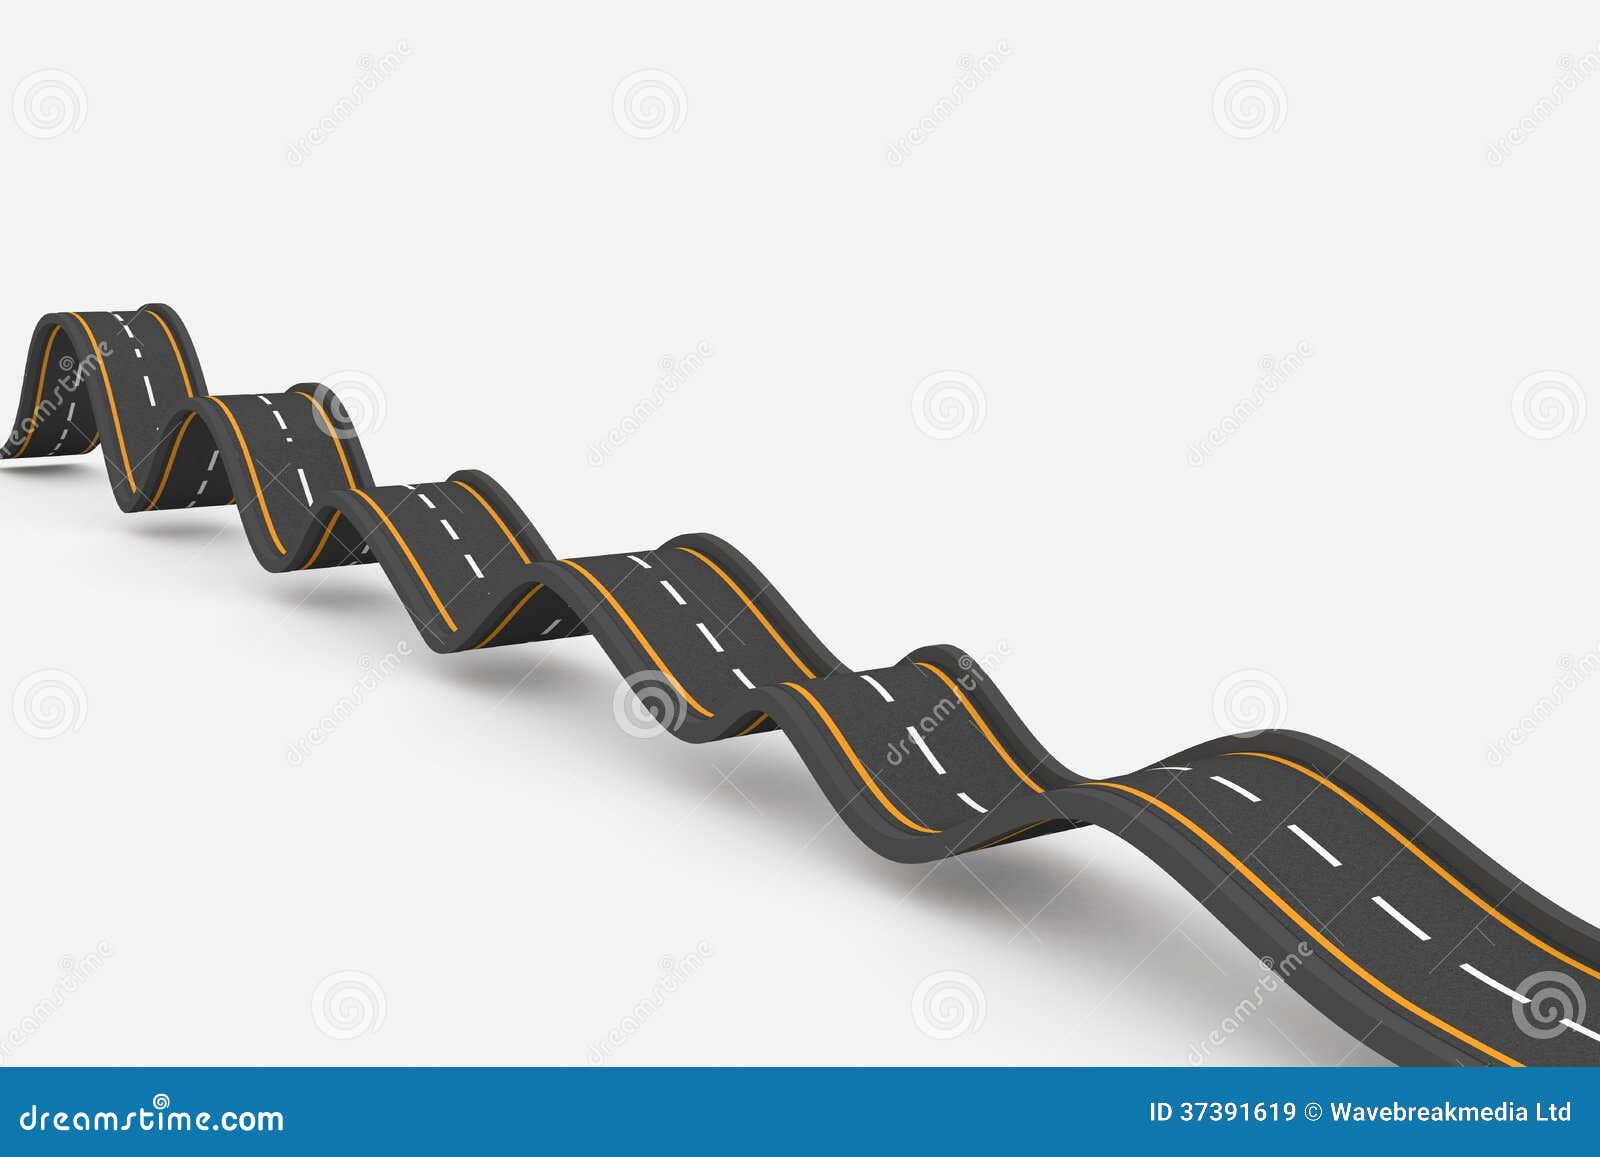 Bumpy Road Background Stock Illustrations 394 Bumpy Road Background Stock Illustrations Vectors Clipart Dreamstime